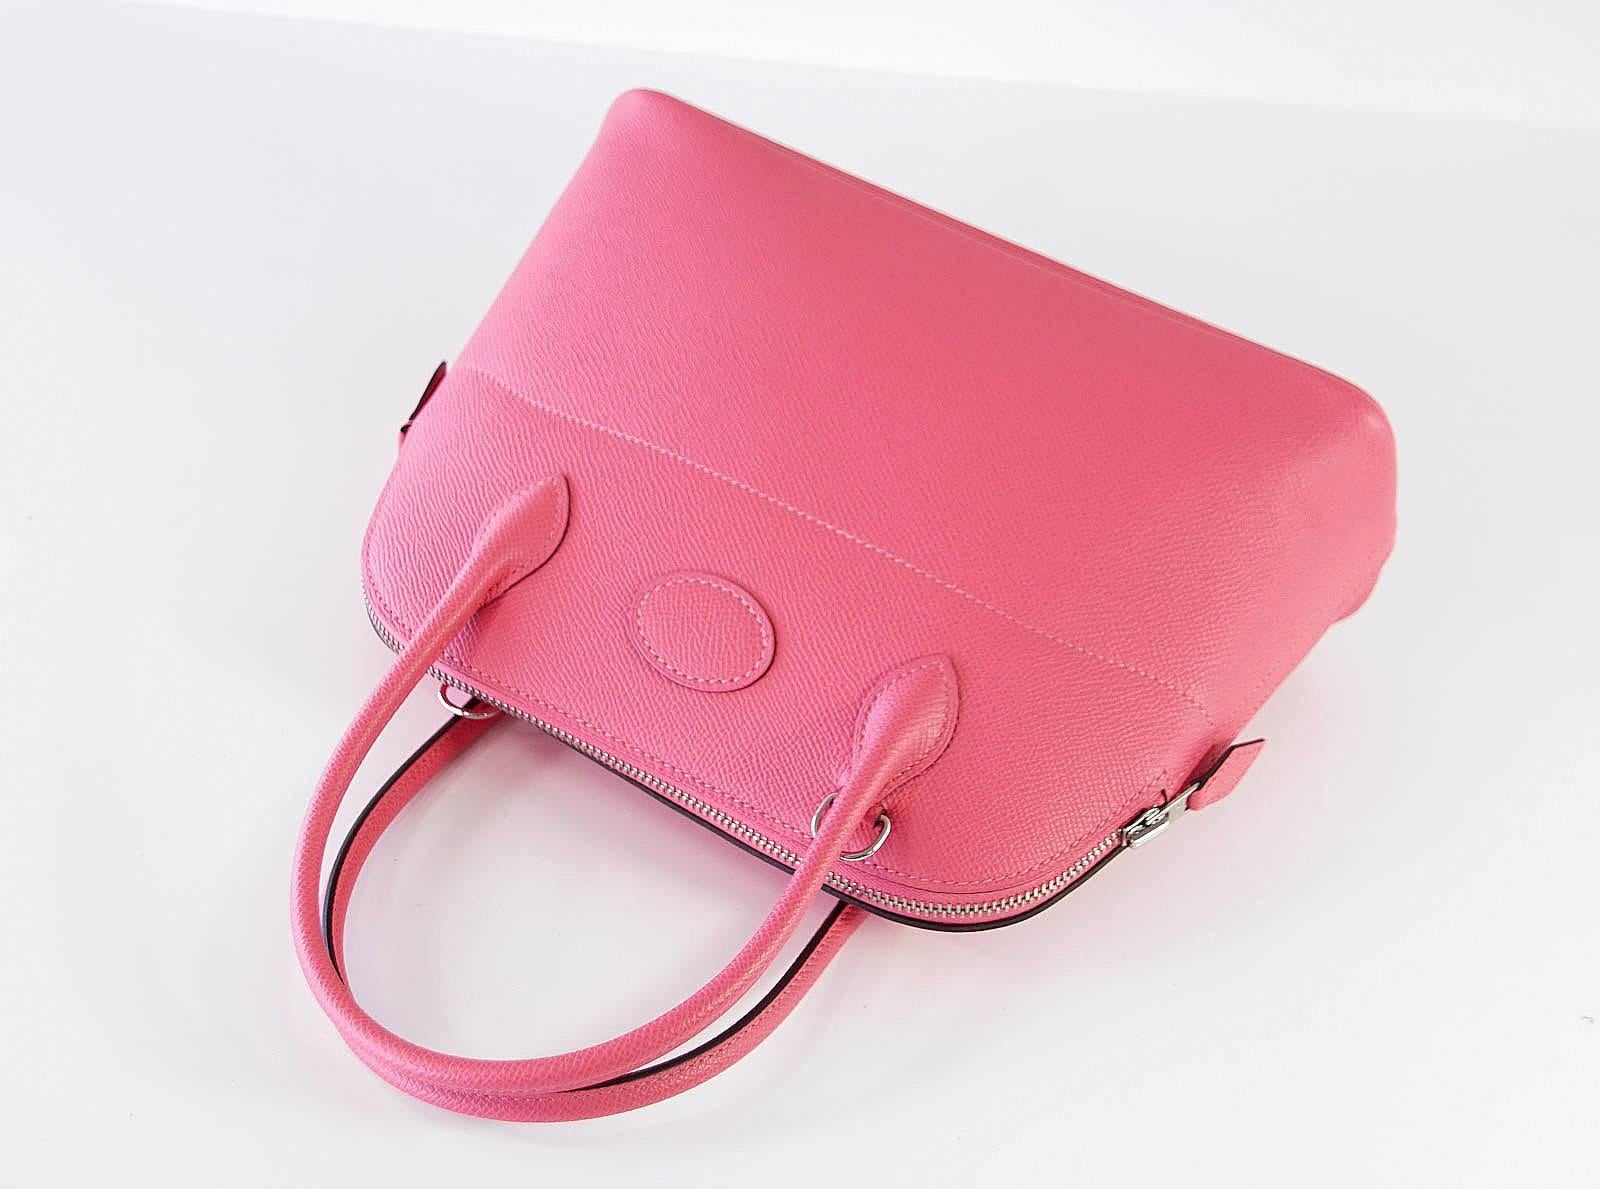 Beautiful and charming 27cm BOLIDE in rich Rose Azalee Epsom leather.
Palladium hardware.   
The shoulder strap adds versatility to the bag allowing for crossbody or shoulder carry.
The bag comes with strap, box, sleeper, and raincoat.
NEW or NEVER